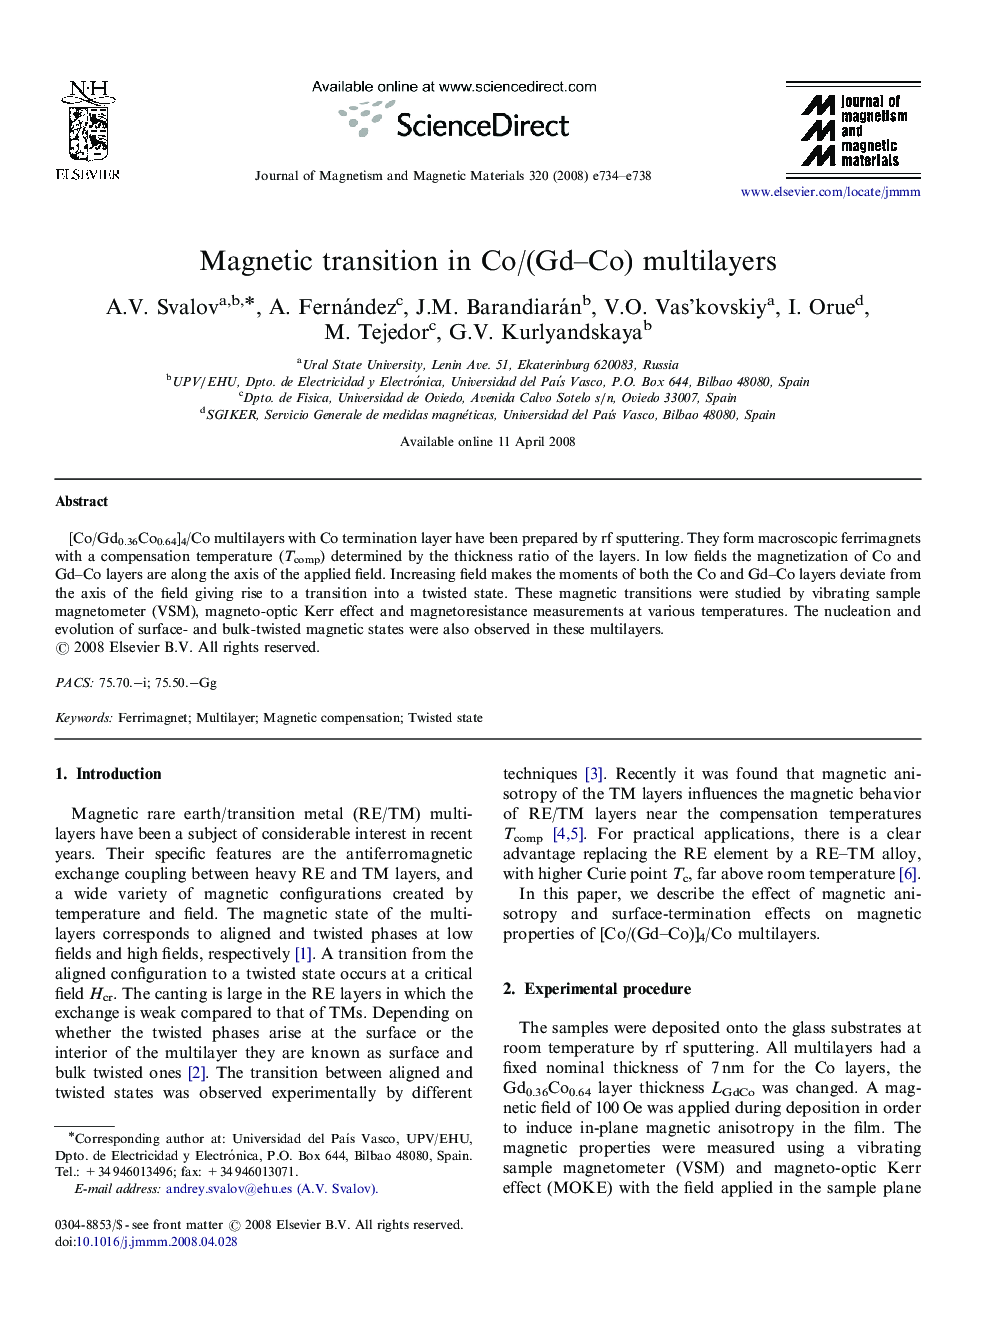 Magnetic transition in Co/(Gd-Co) multilayers